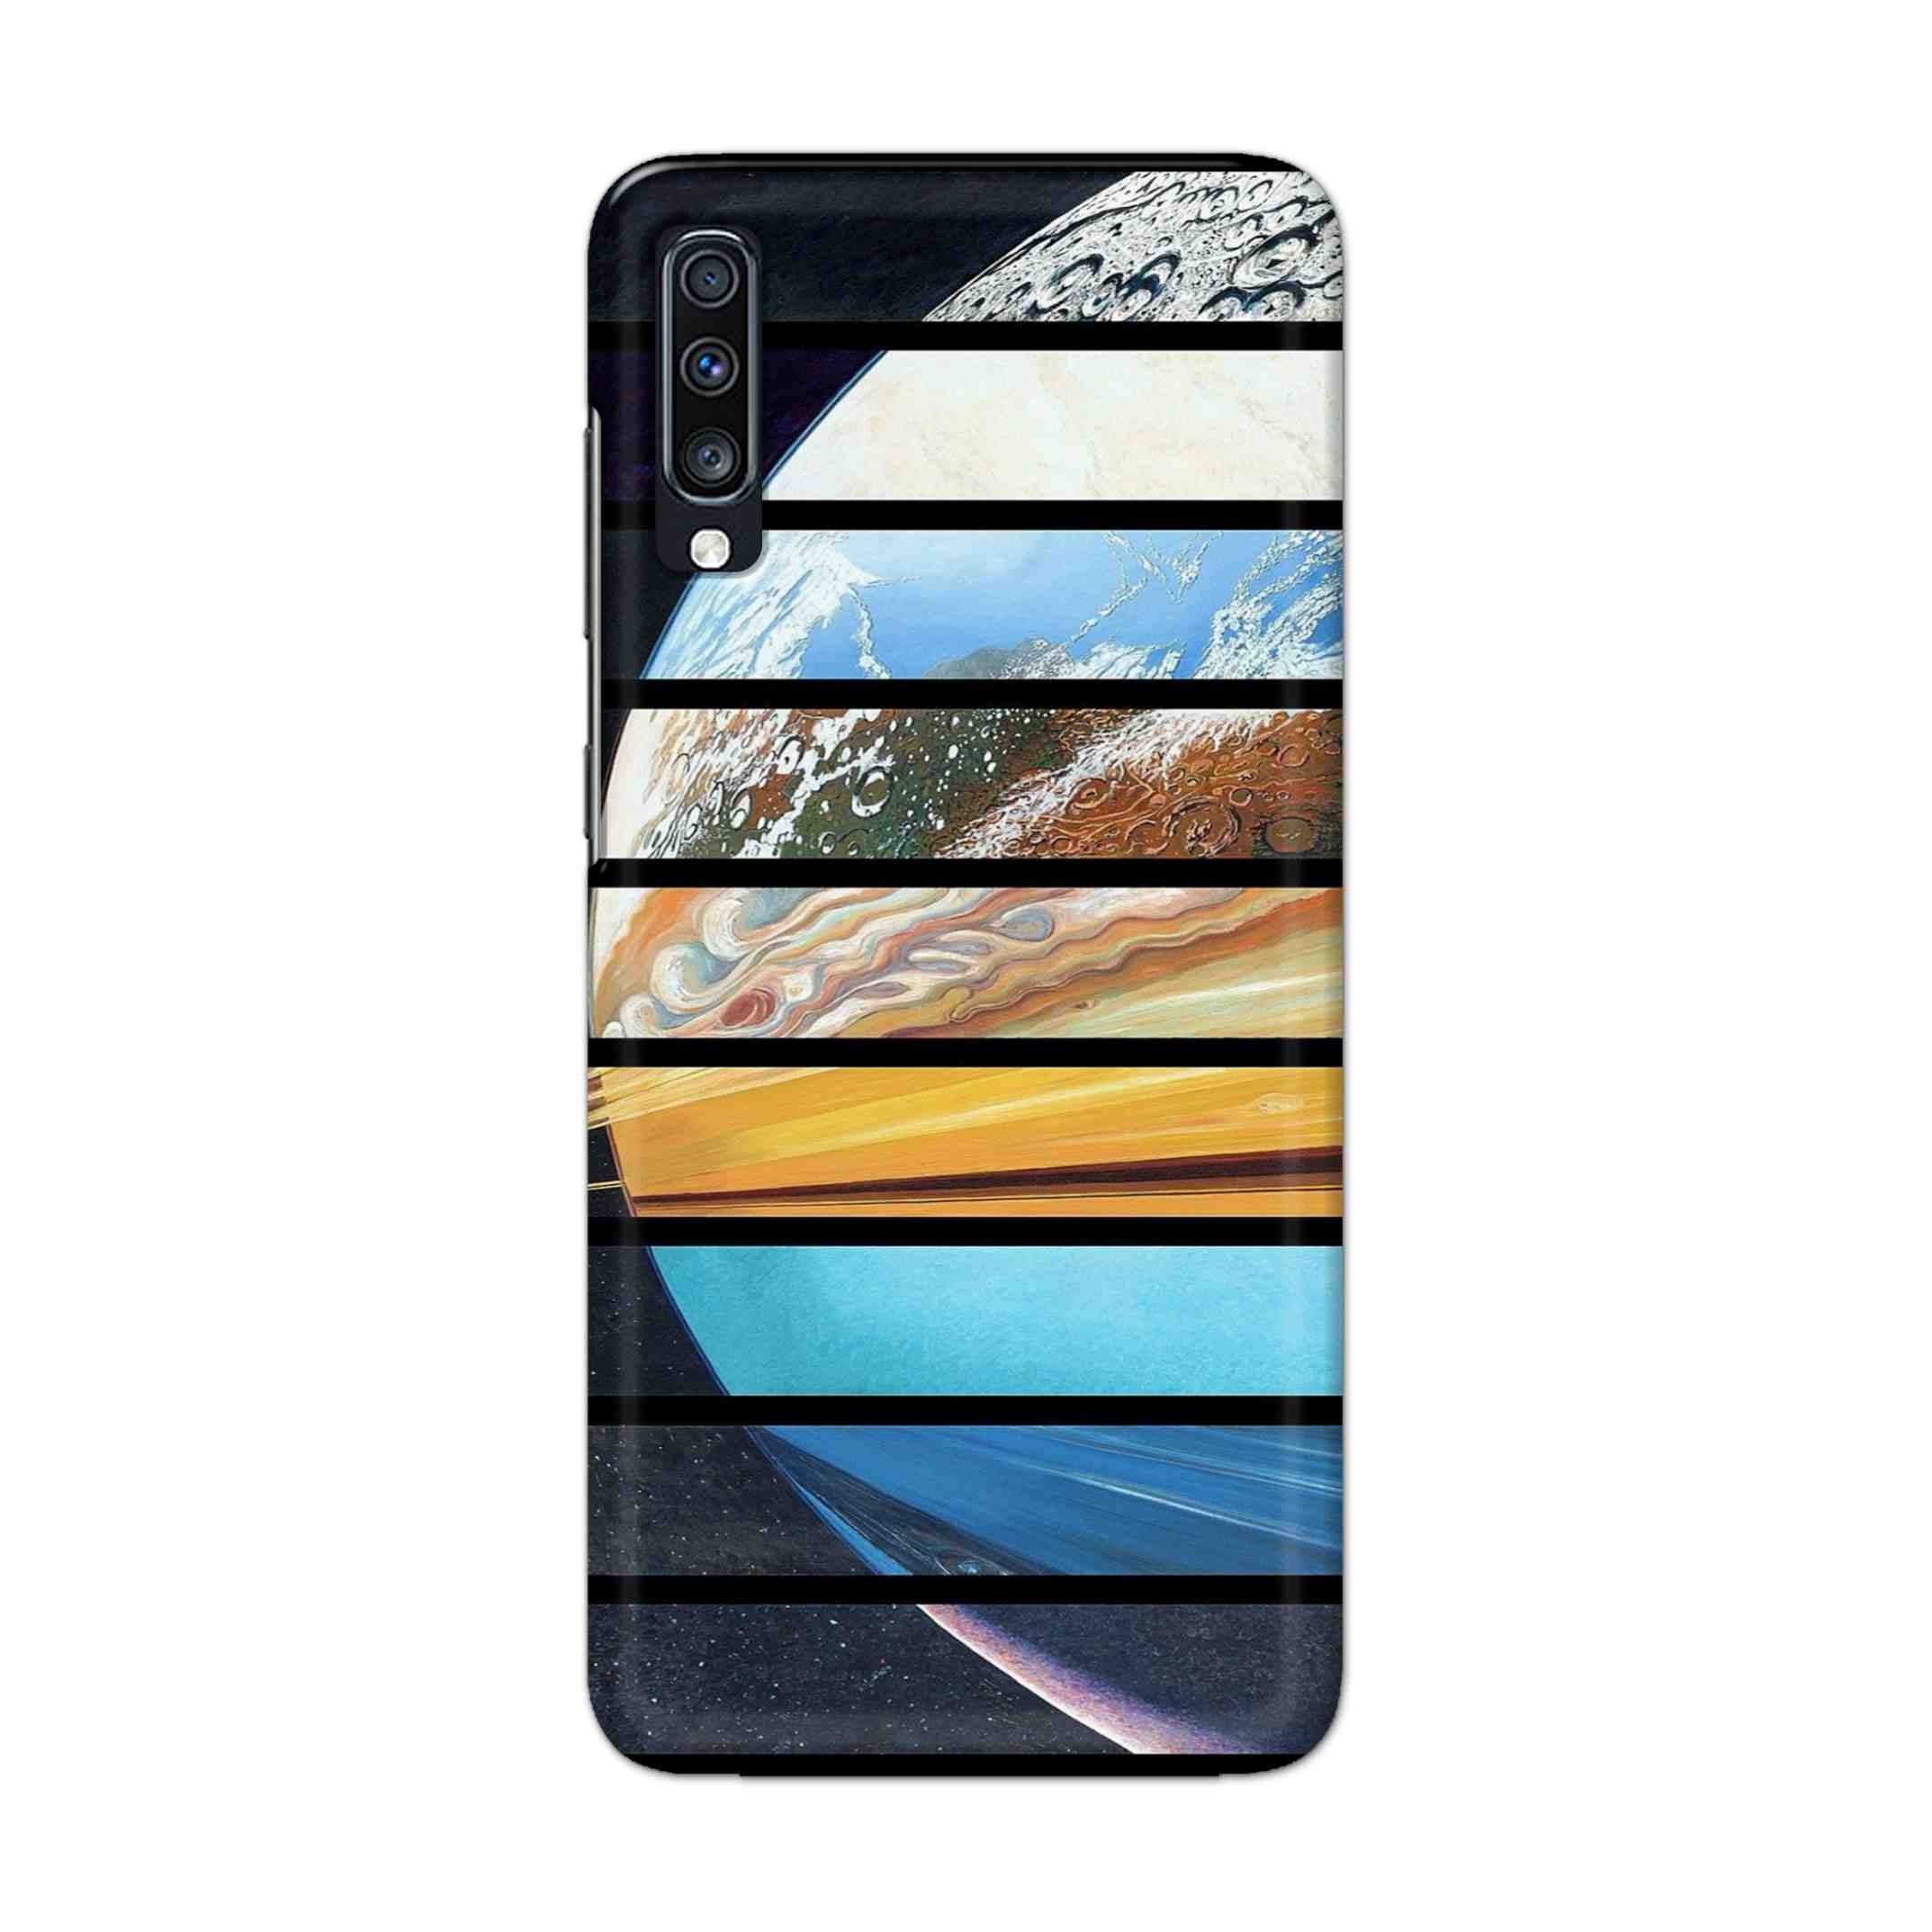 Buy Colourful Earth Hard Back Mobile Phone Case Cover For Samsung Galaxy A70 Online